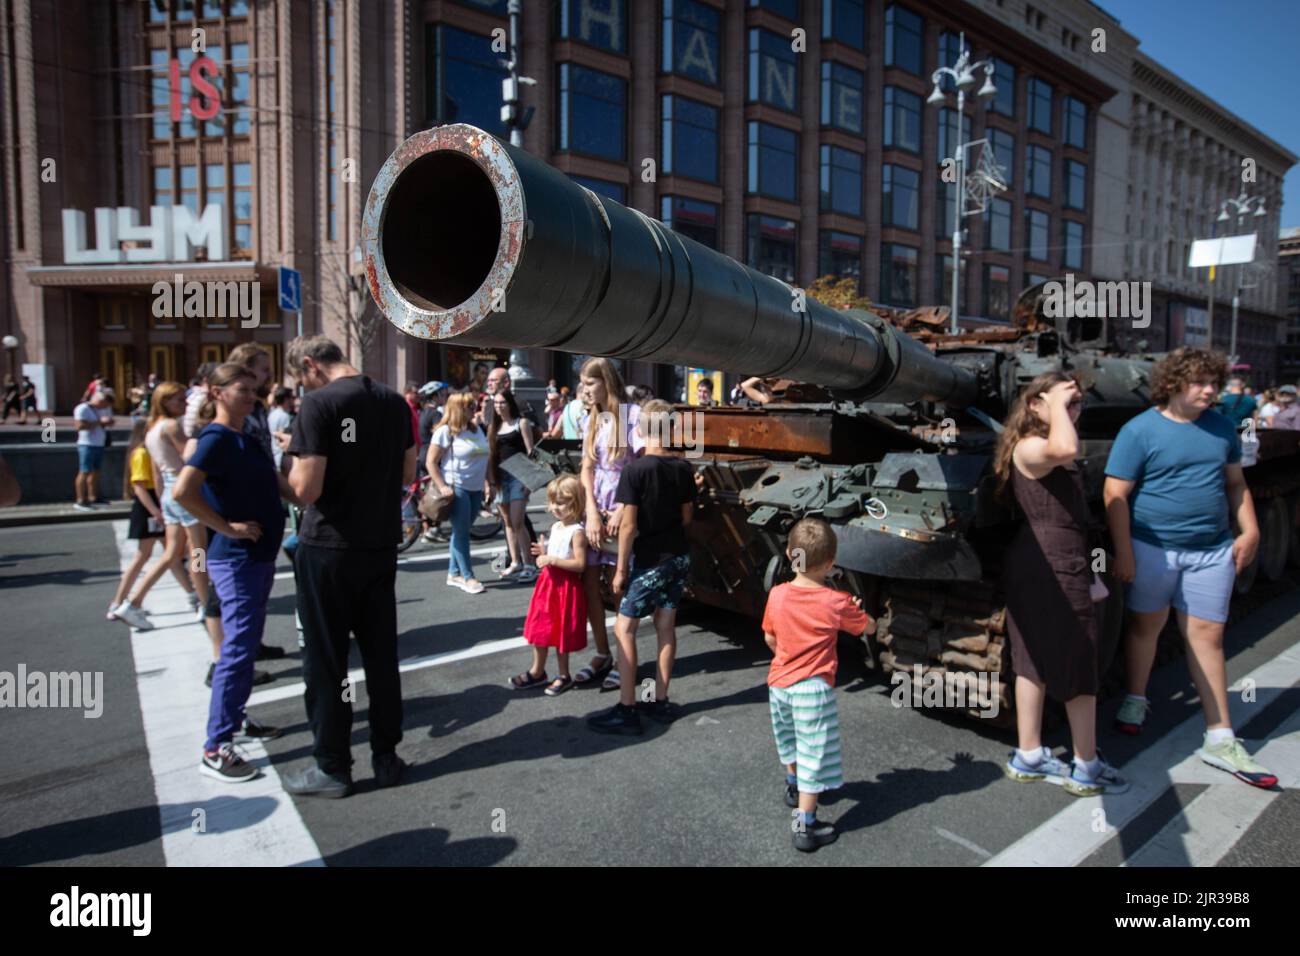 People look at the destroyed Russian tank displayed on the main street Khreshchatyk as part of the upcoming celebration of the Independence Day of Ukraine amid Russia's invasion of Ukraine in central Kyiv. Stock Photo